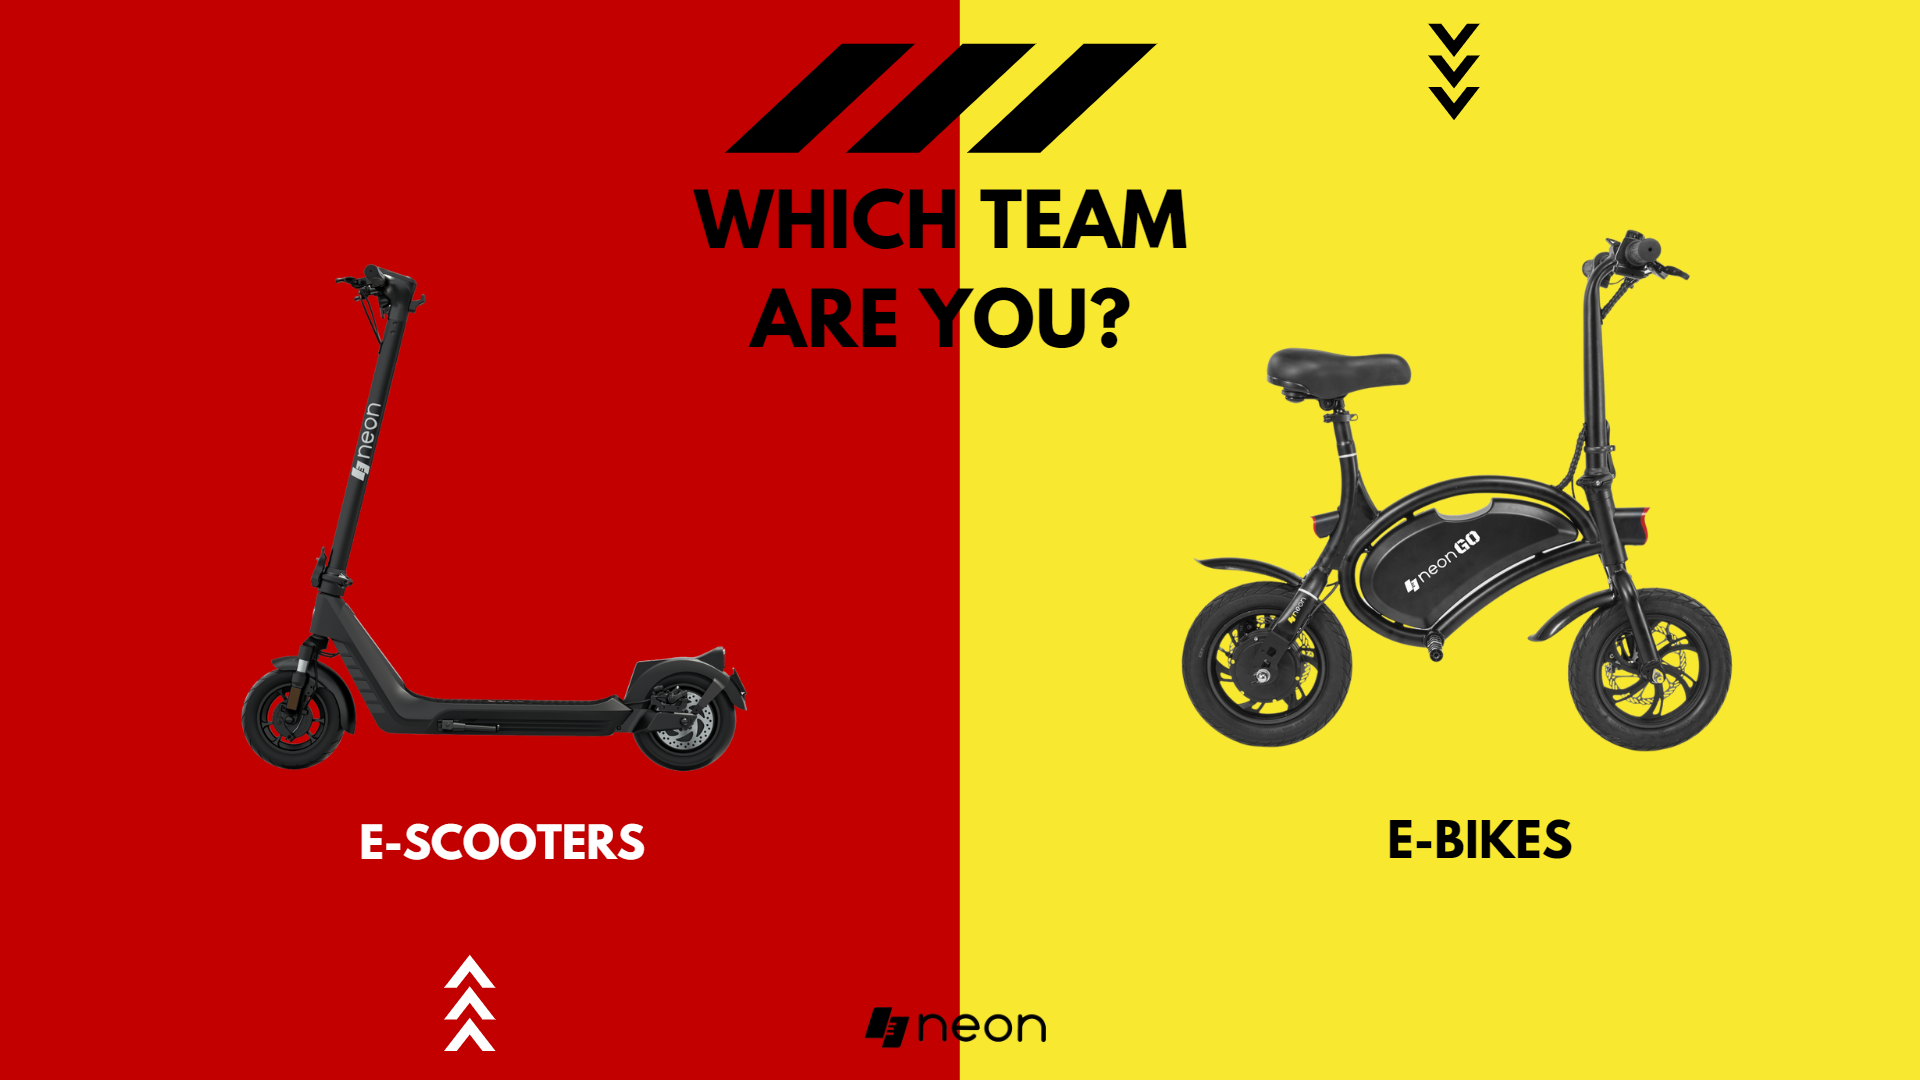 Escooter vs Ebikes: Which is the Best Choice for You?